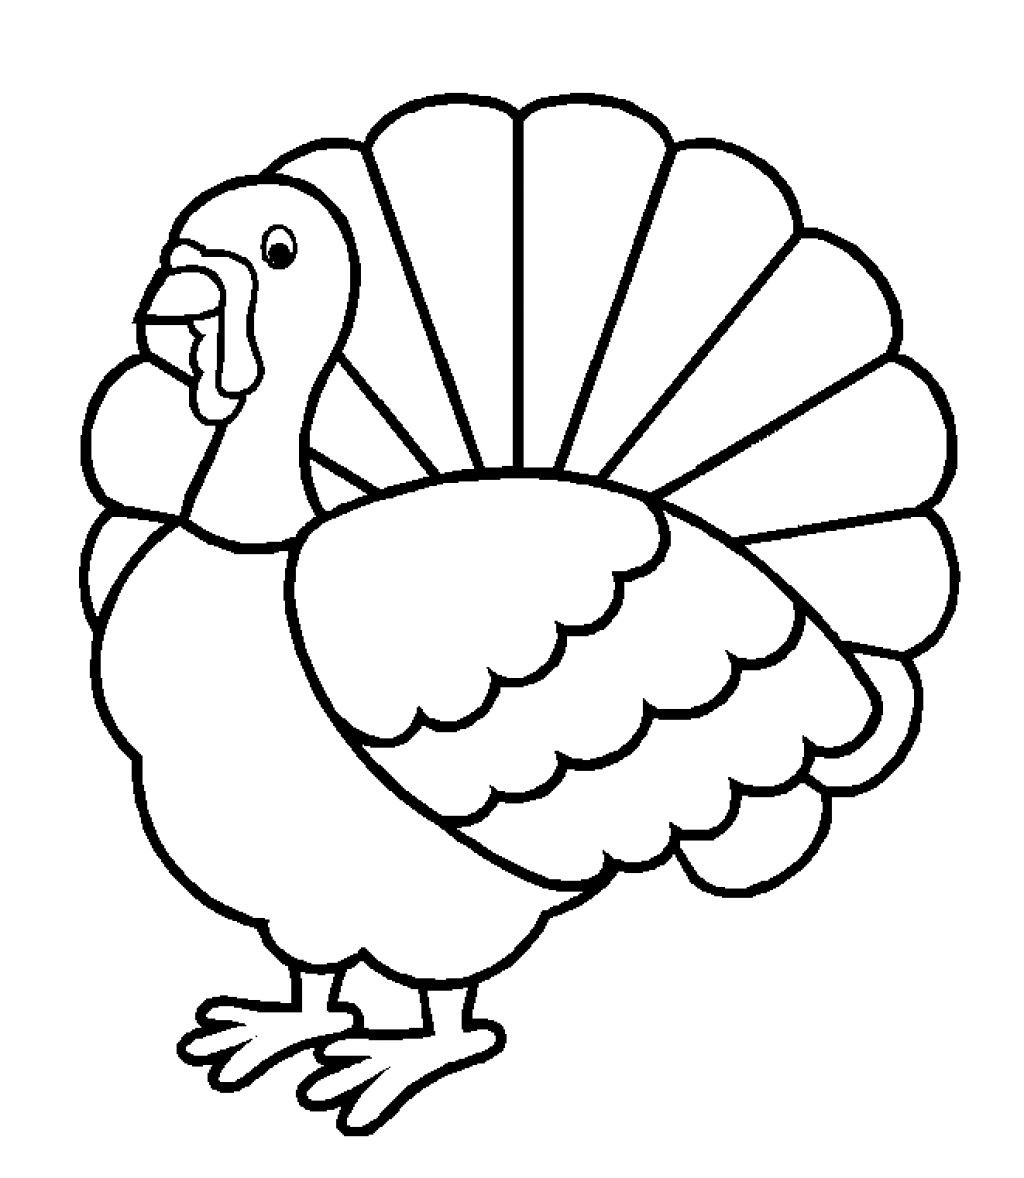 turkey-drawing-outline-at-getdrawings-free-download